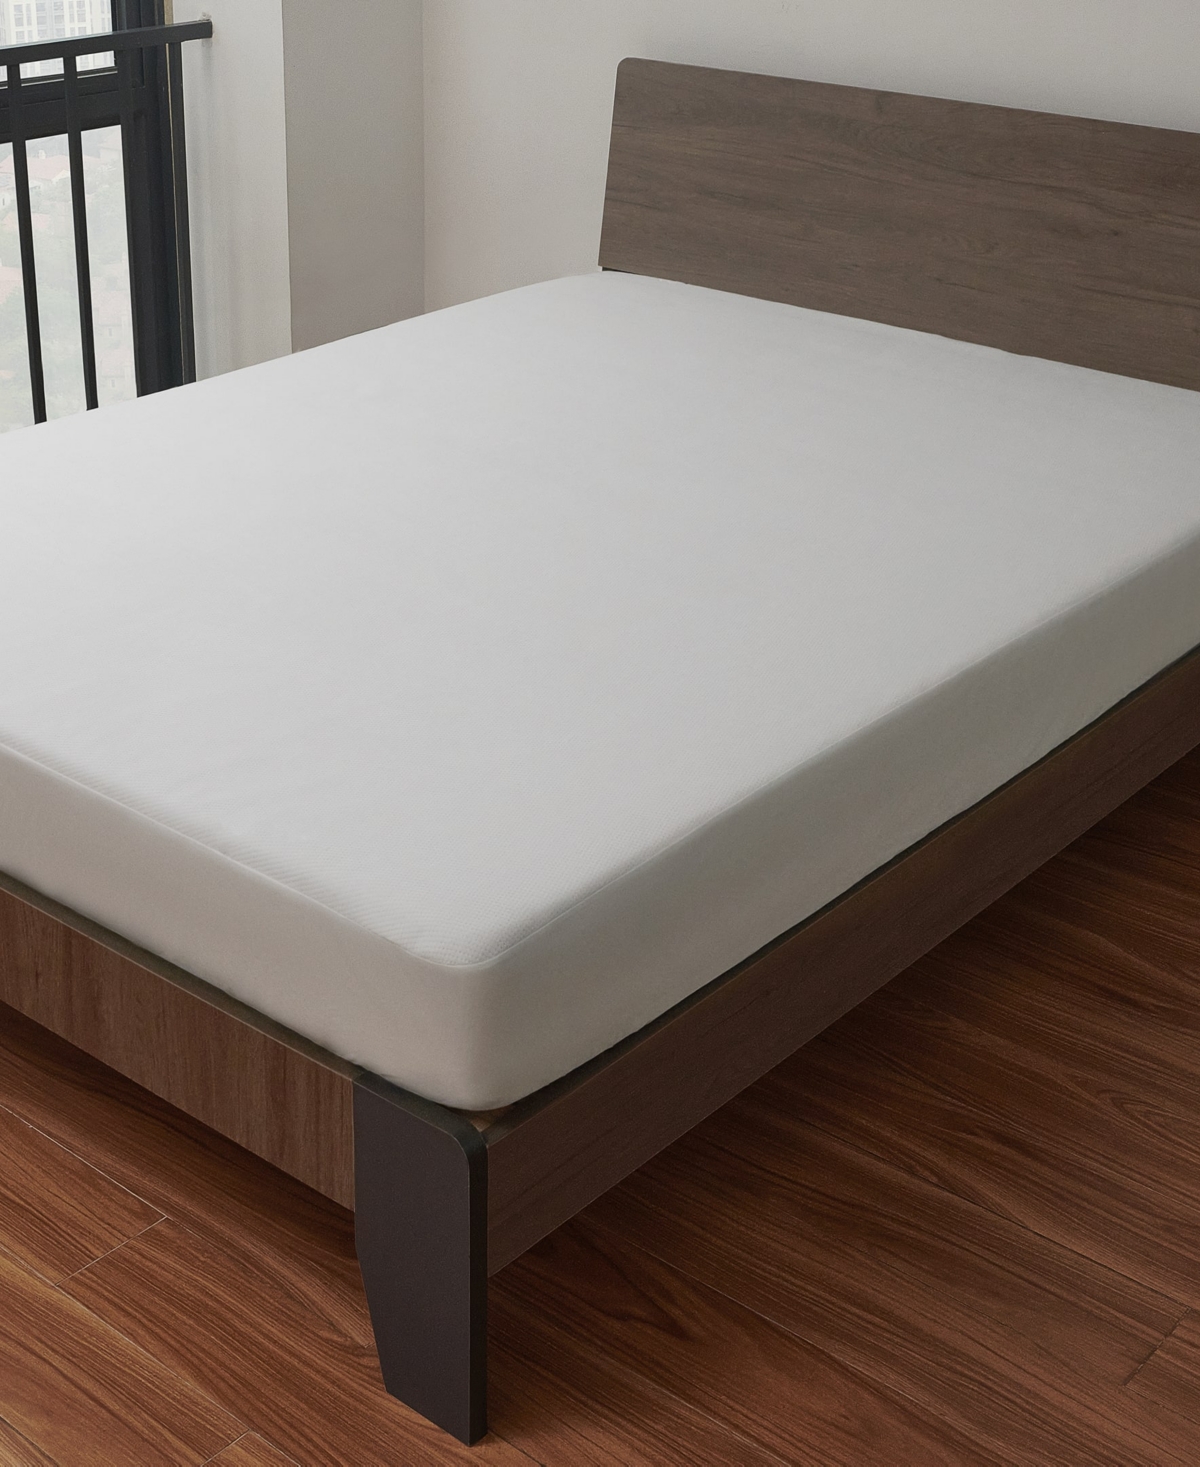 Shop Coop Sleep Goods The Ultra Luxe Water-resistant Mattress Protector, Full In White